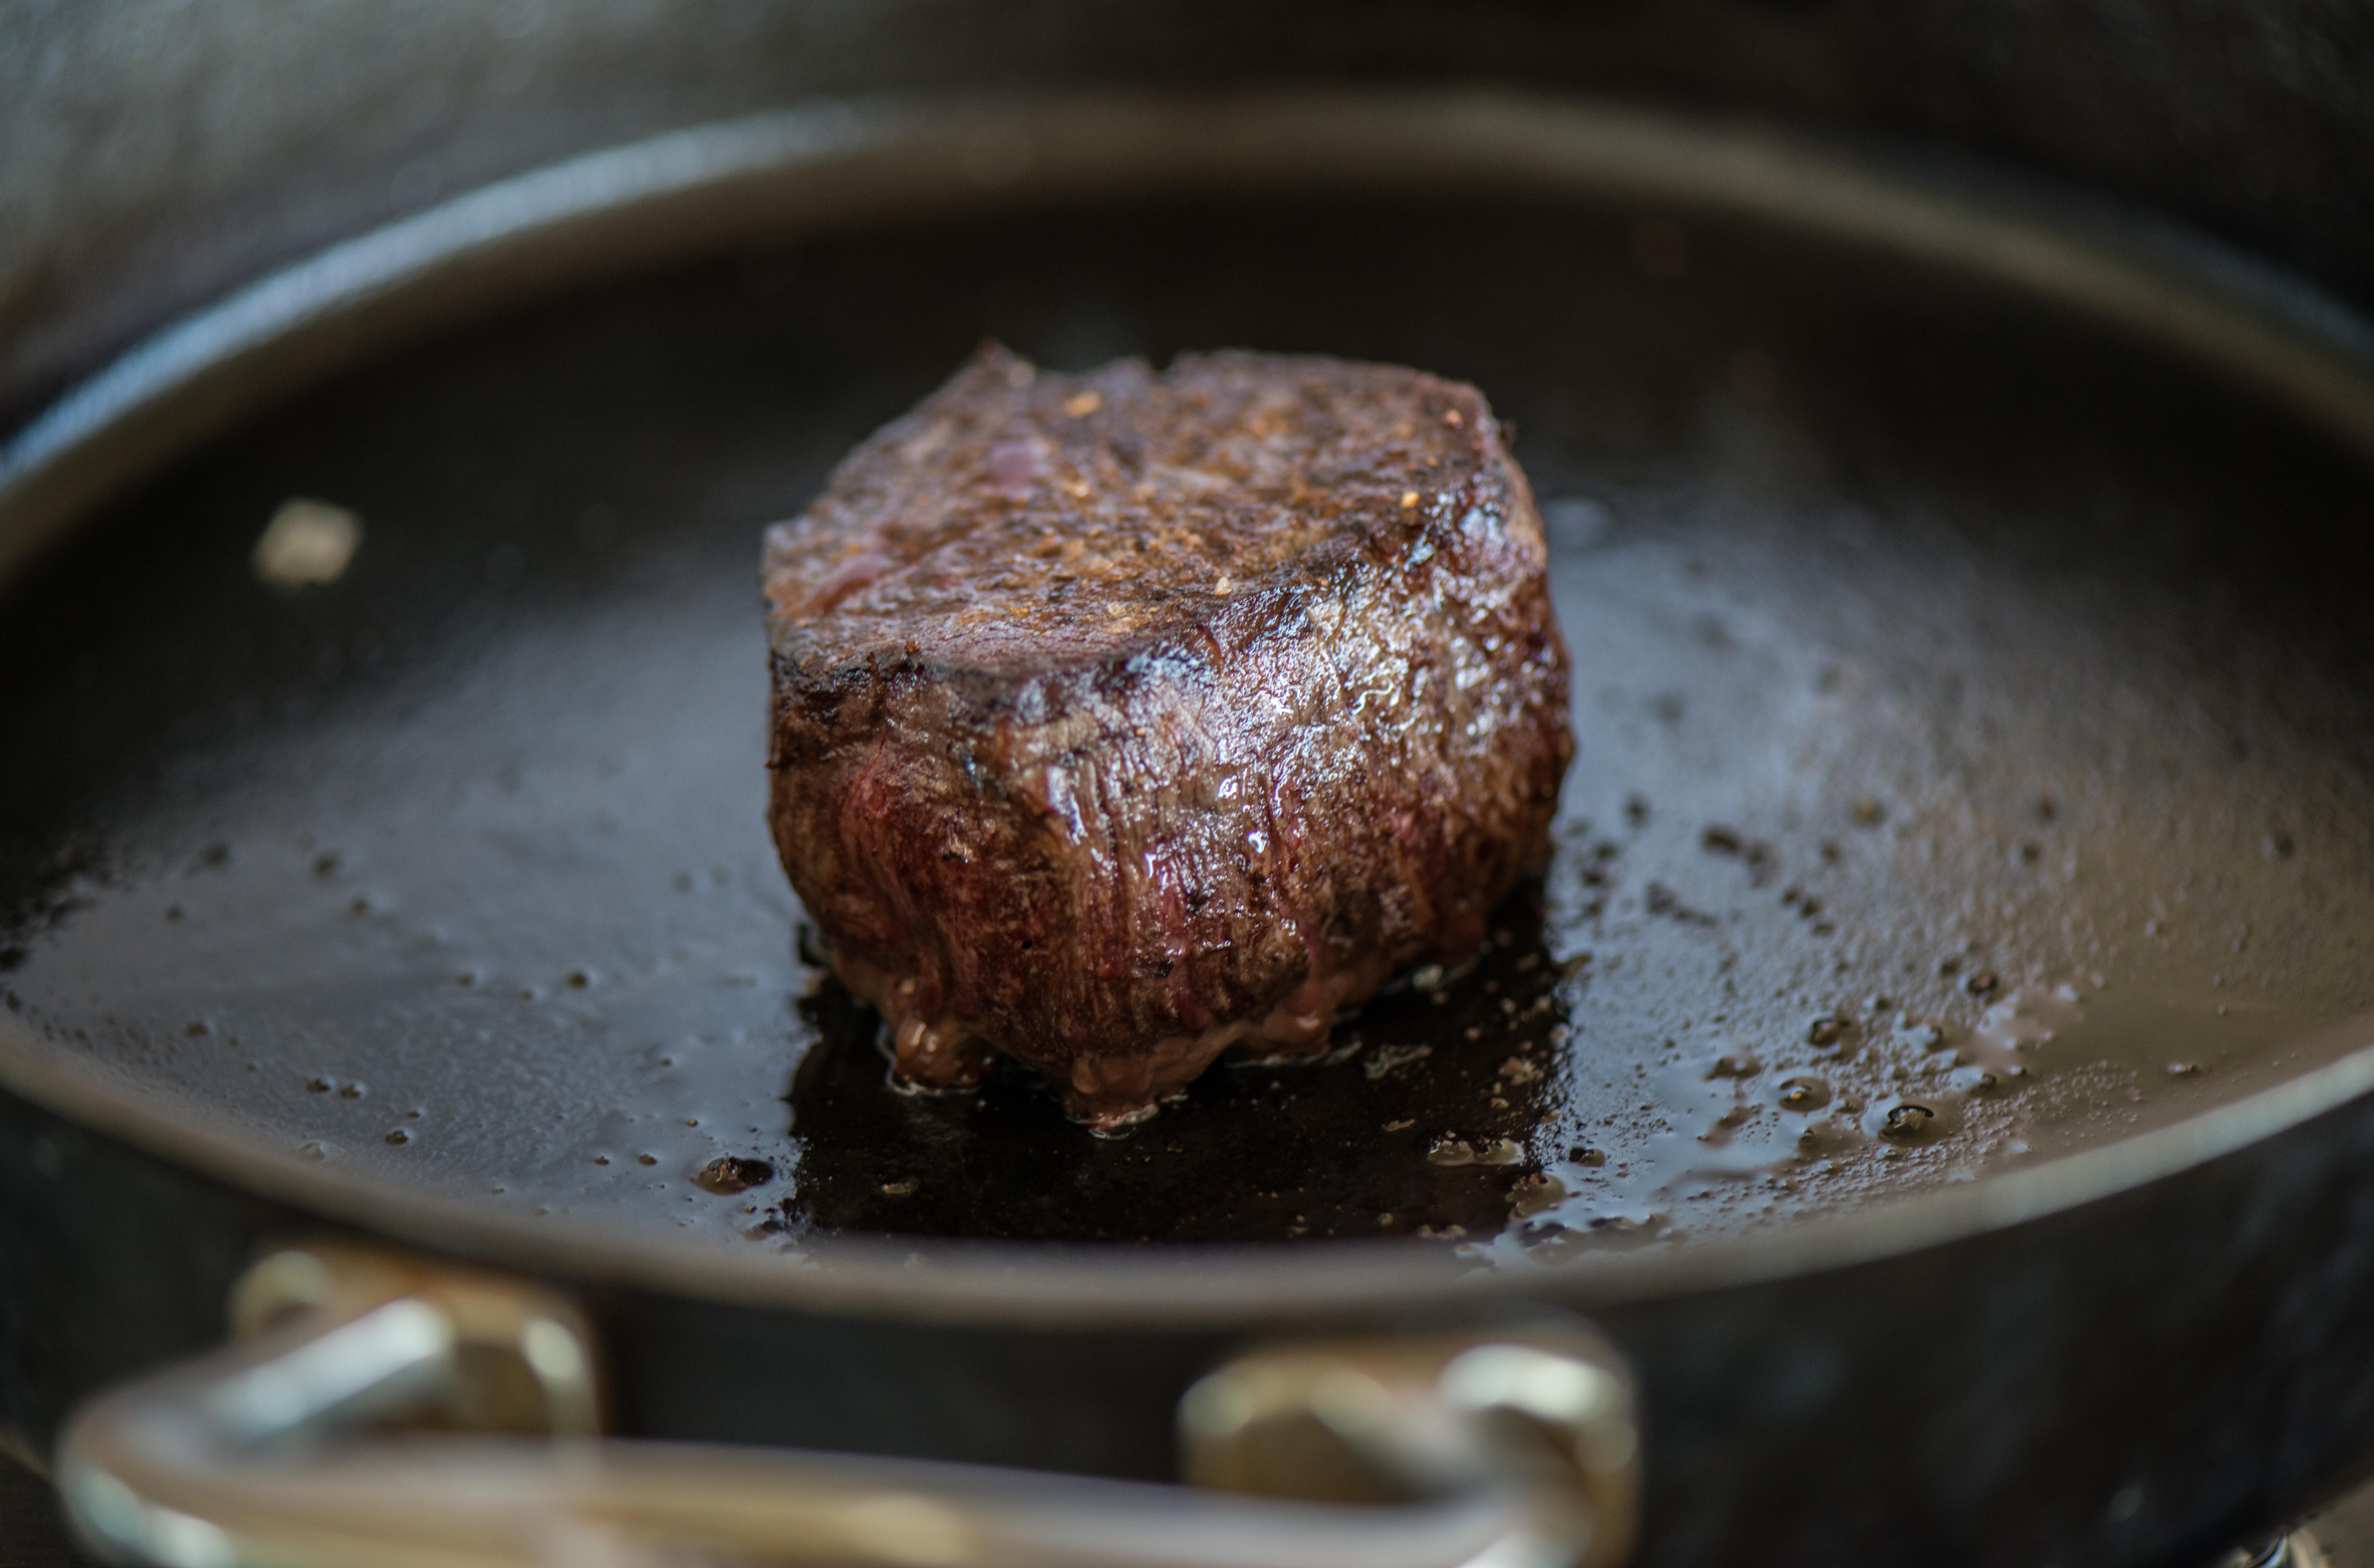 5 Tips for Cooking Wagyu Beef Like a Master